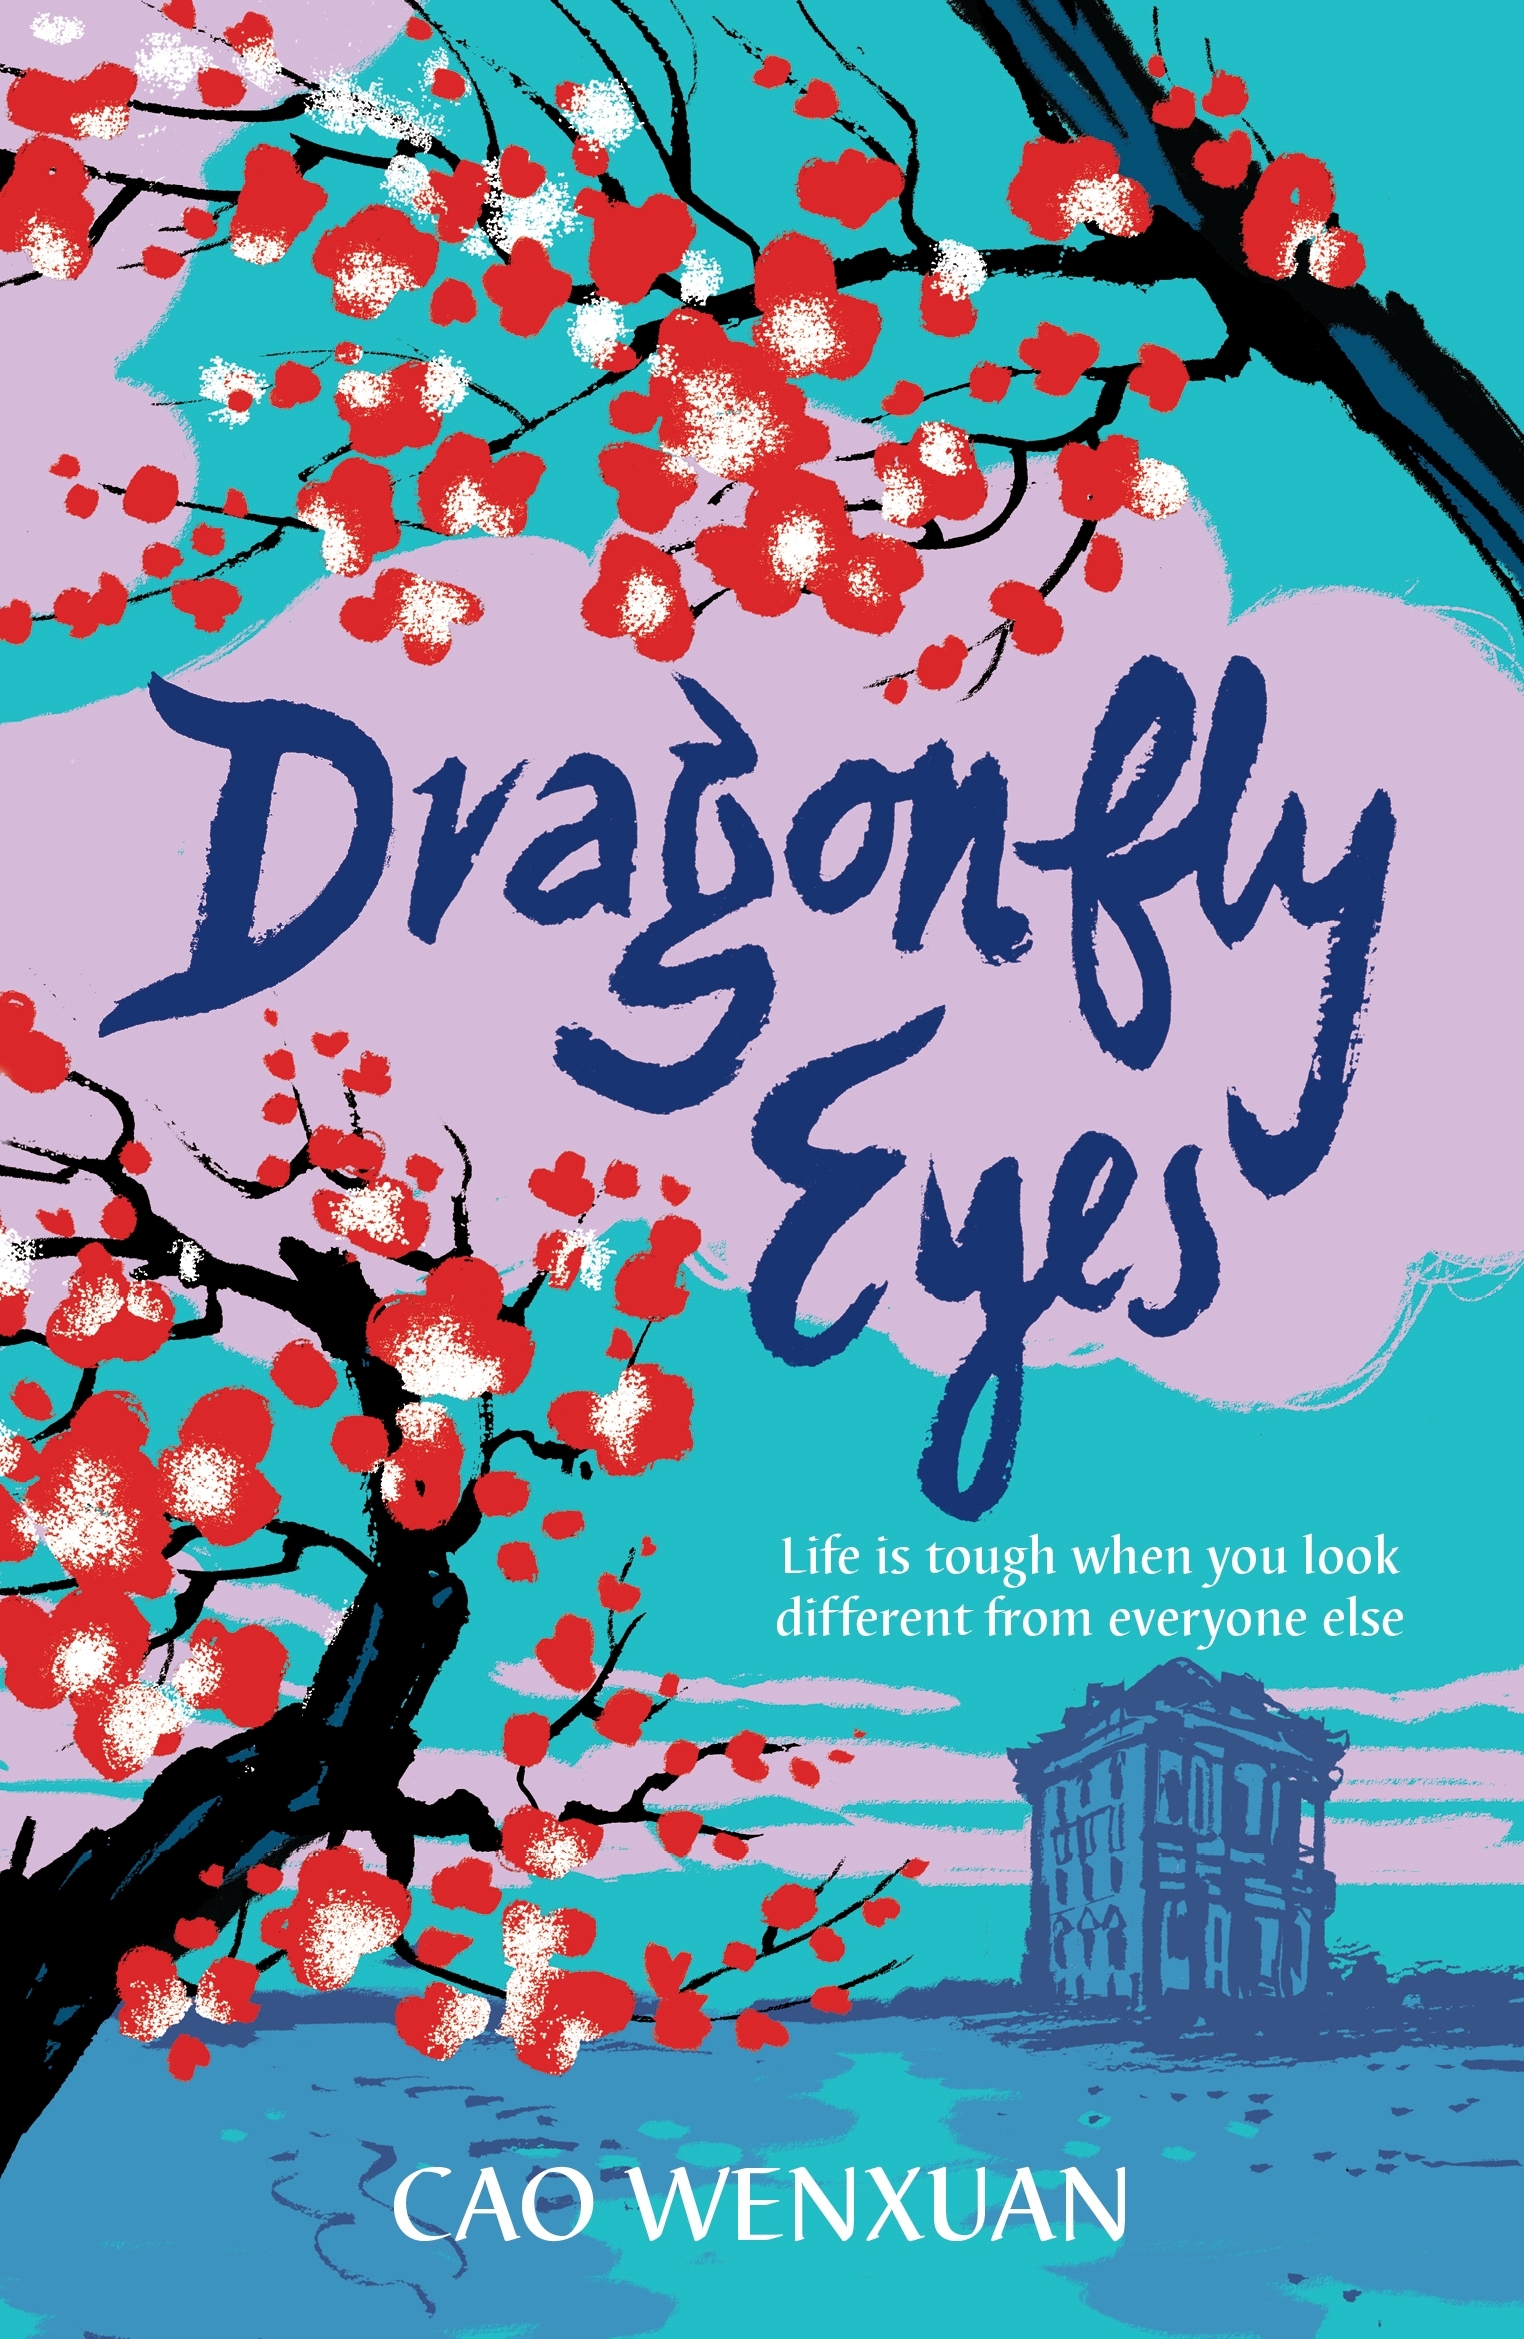 Cover of Dragonfly Eyes featuring an illustration of tree branches with red flowers in the foreground and a building inn the background in blue. The title is in large purple letters within a lighter purple cloud.